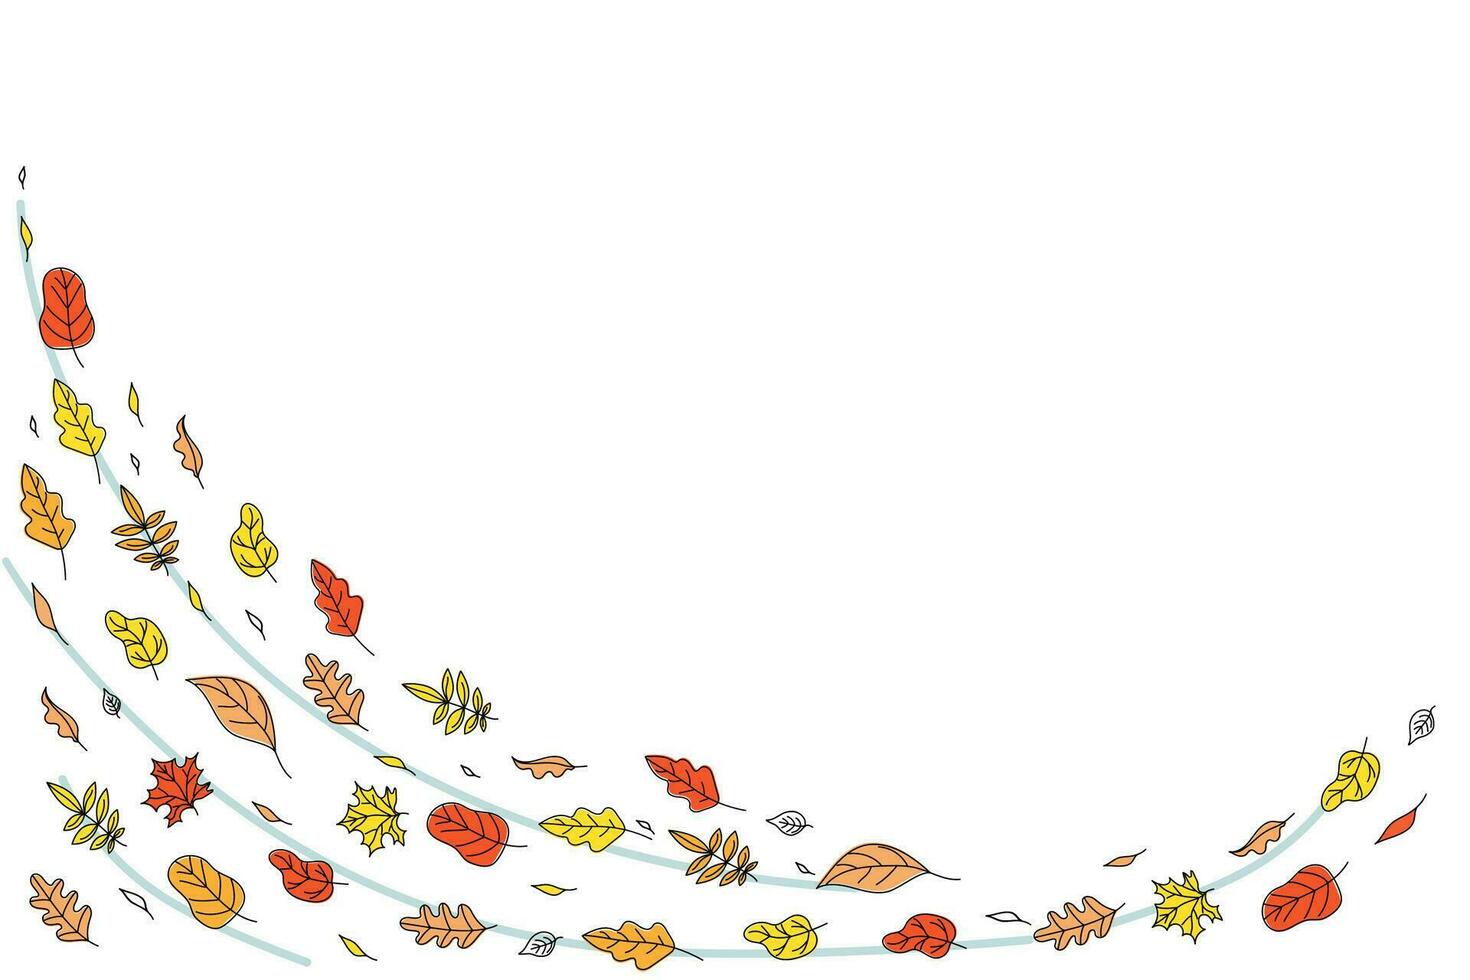 Autumn Banner frame, border leaves, rowan branch, maple leaf, doodle, drawings. Black and white vector illustration on color spots. Background white isolated.